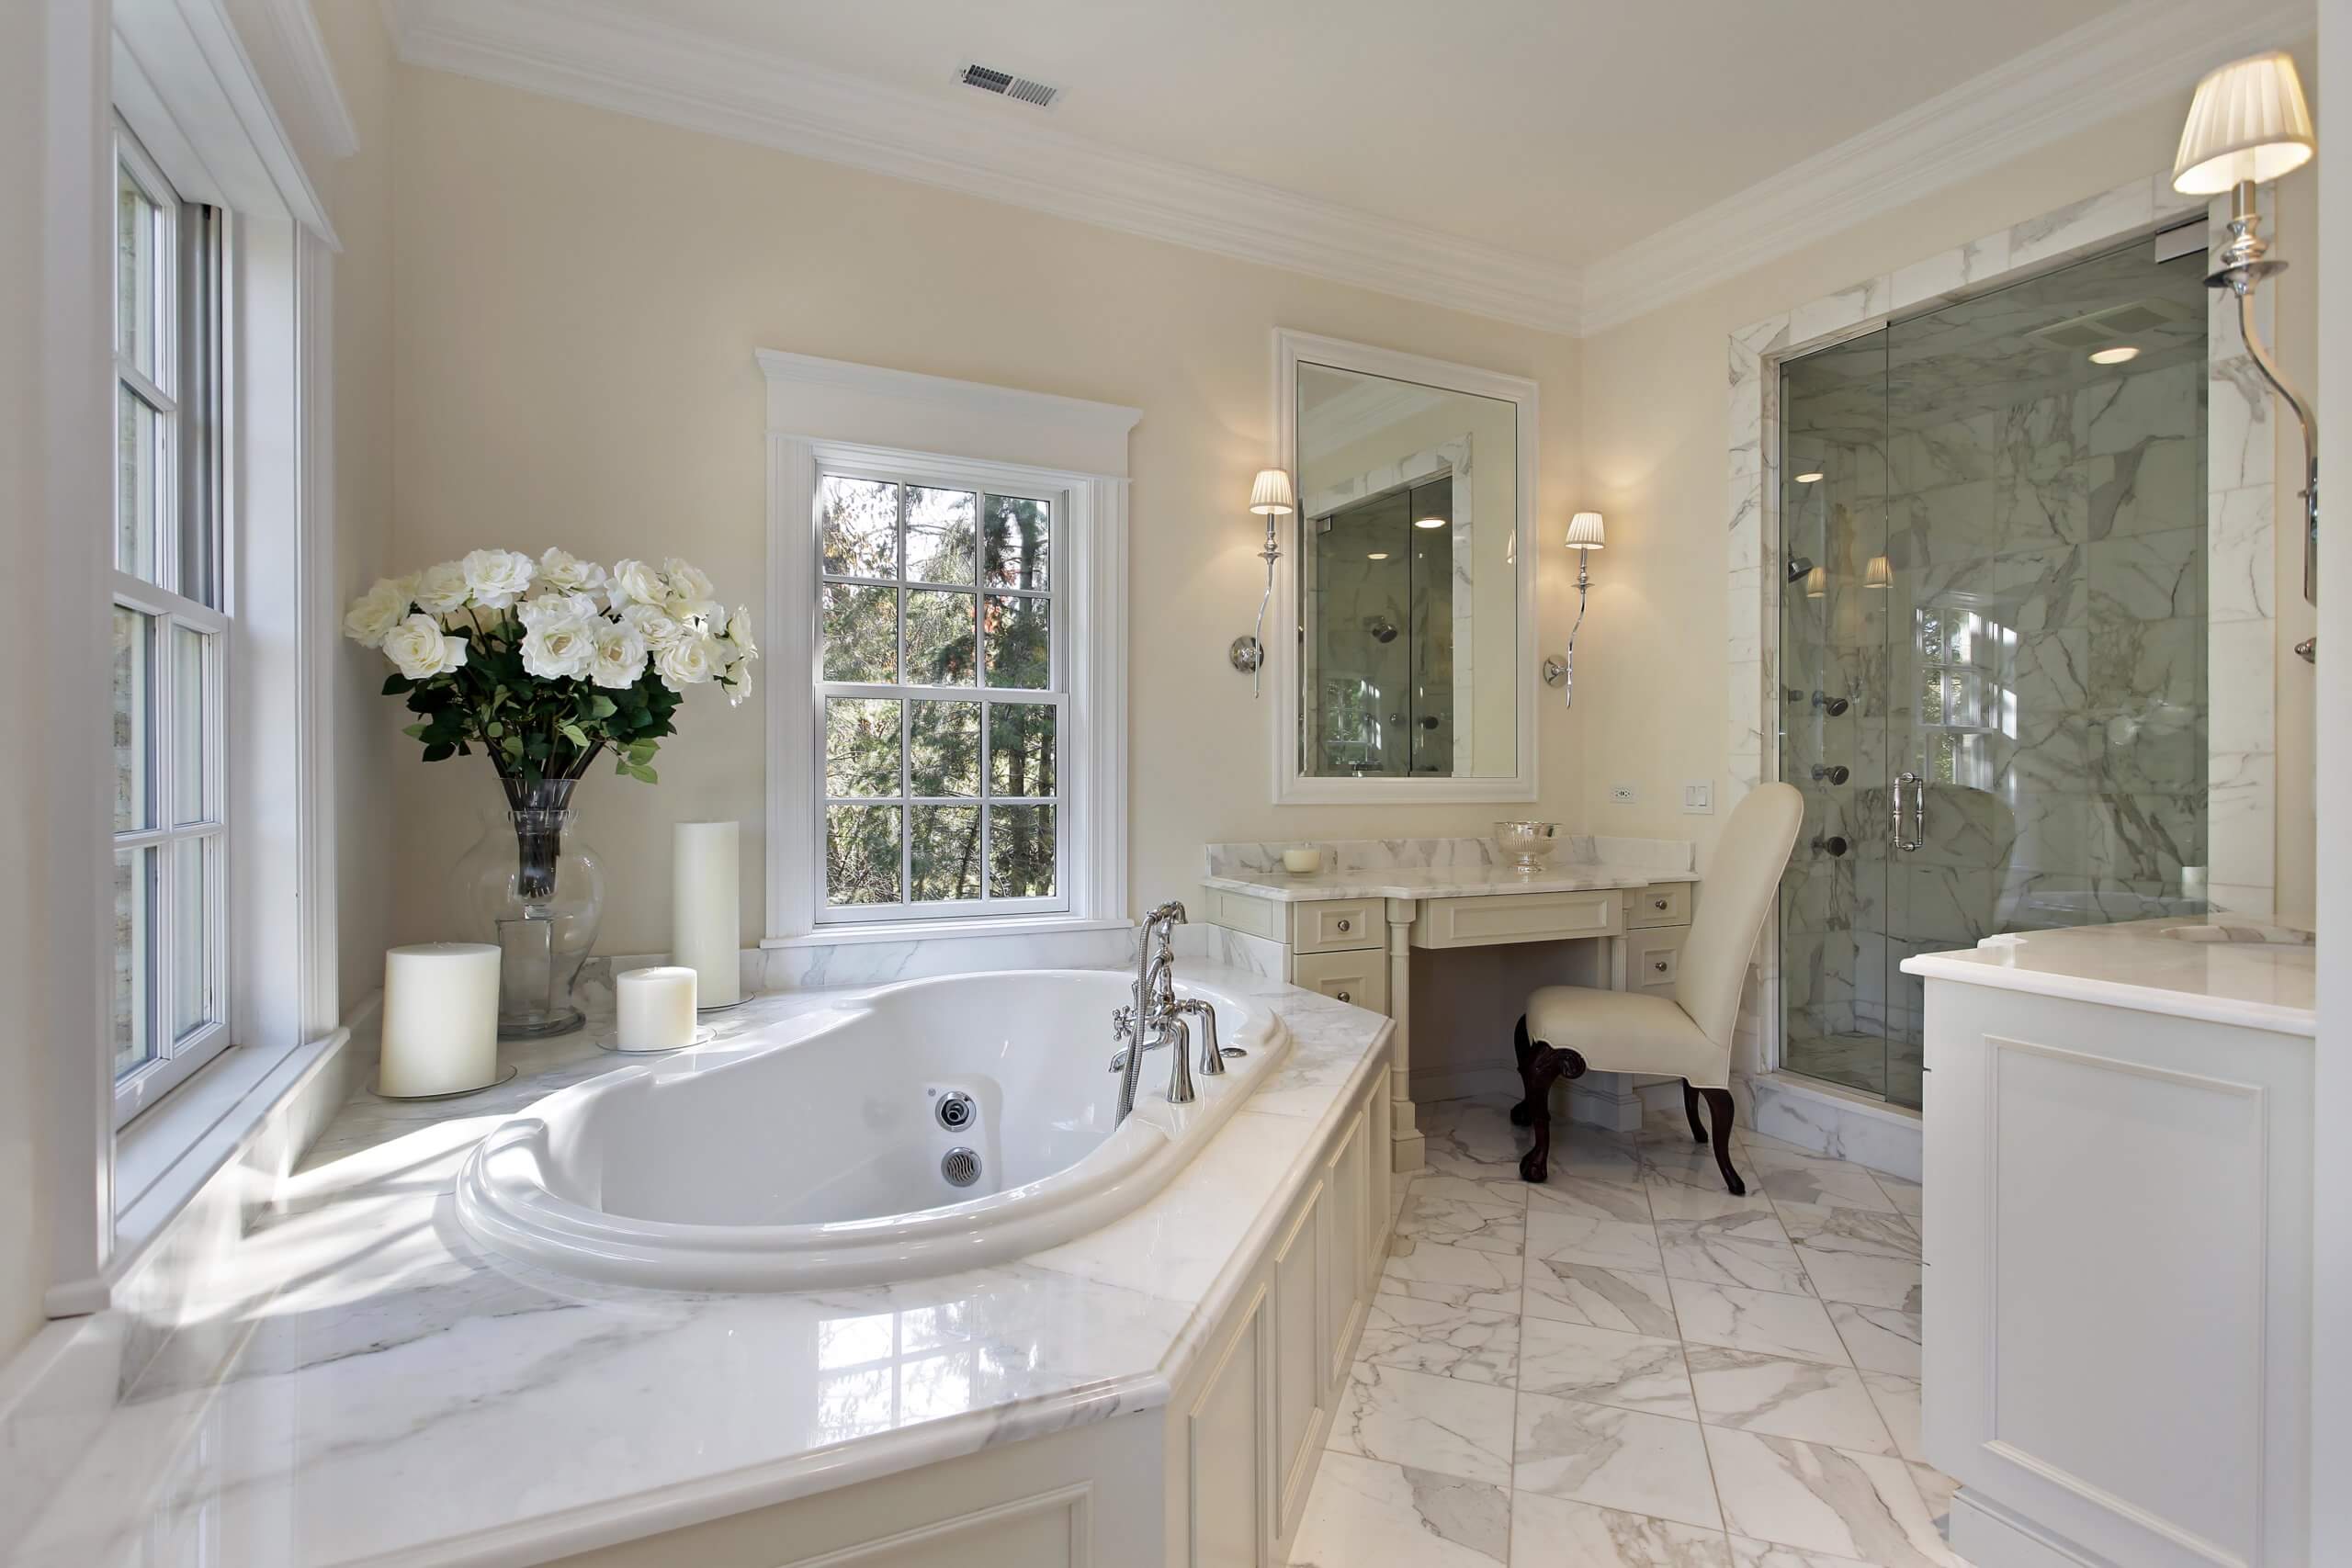 Top 5 Reasons To Remodel Your Bathroom